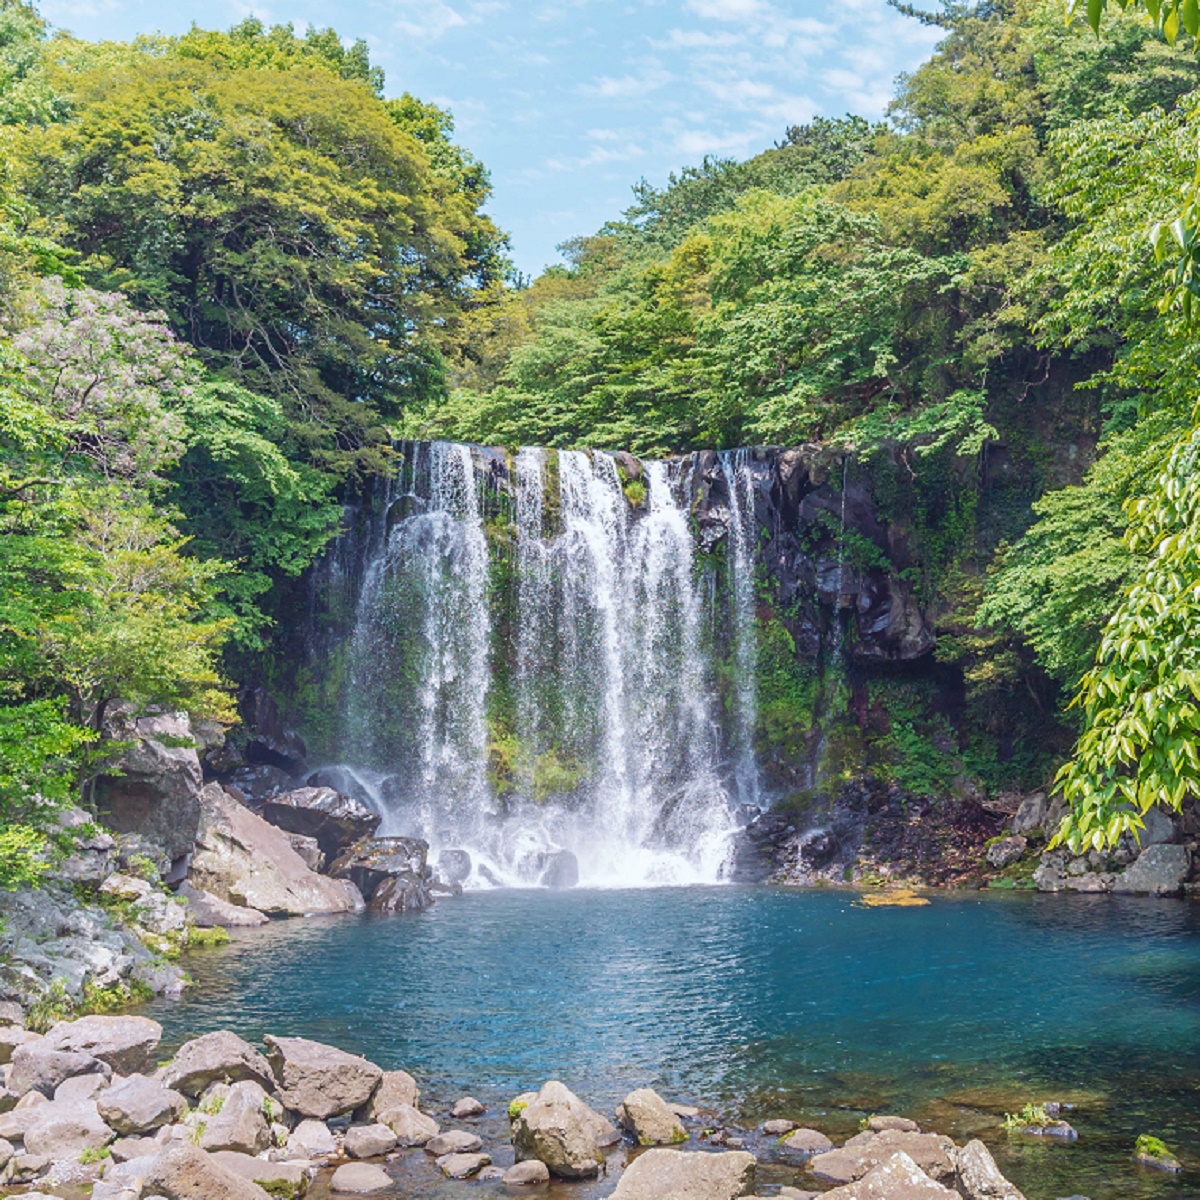 A picturesque waterfall surrounded by lush greenery and a pool of blue water